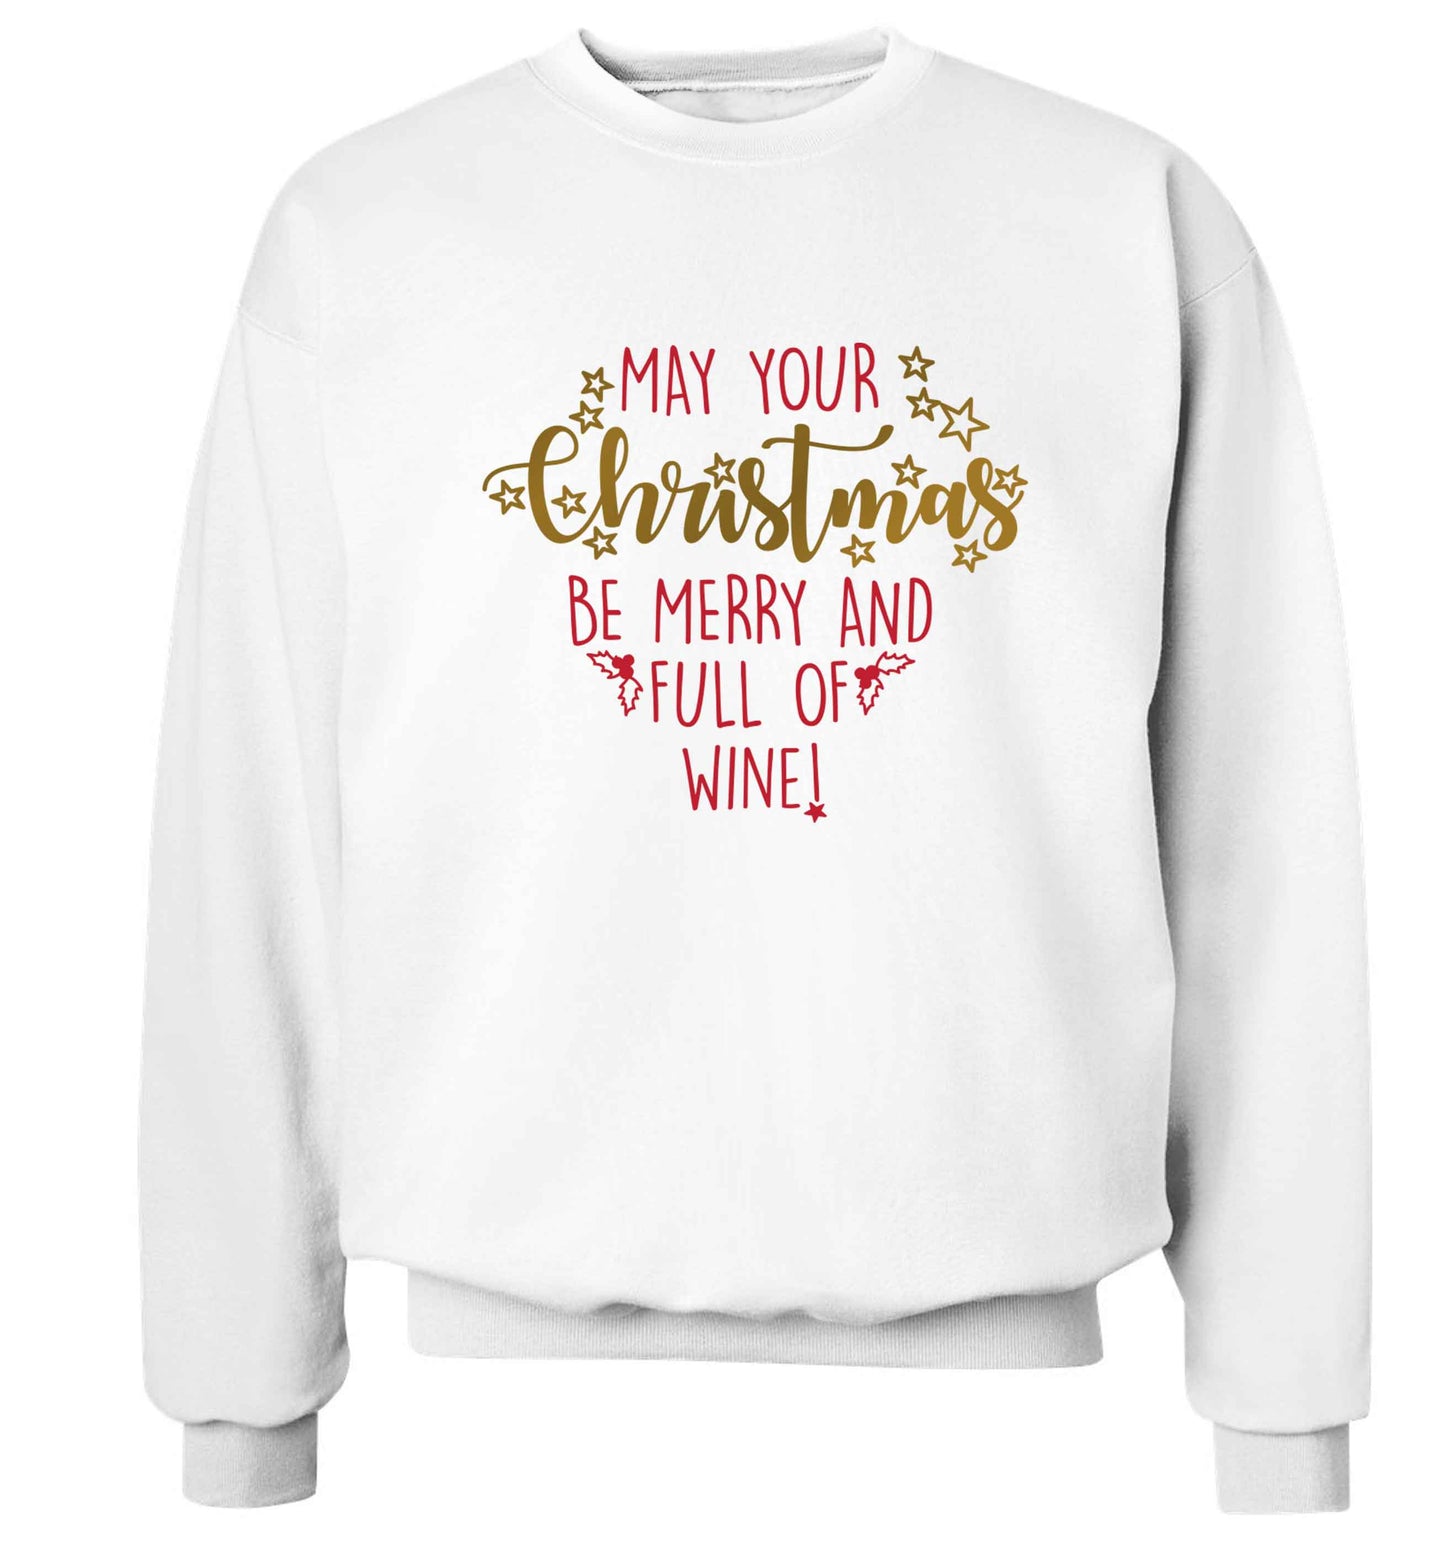 May your Christmas be merry and full of wine Adult's unisex white Sweater 2XL